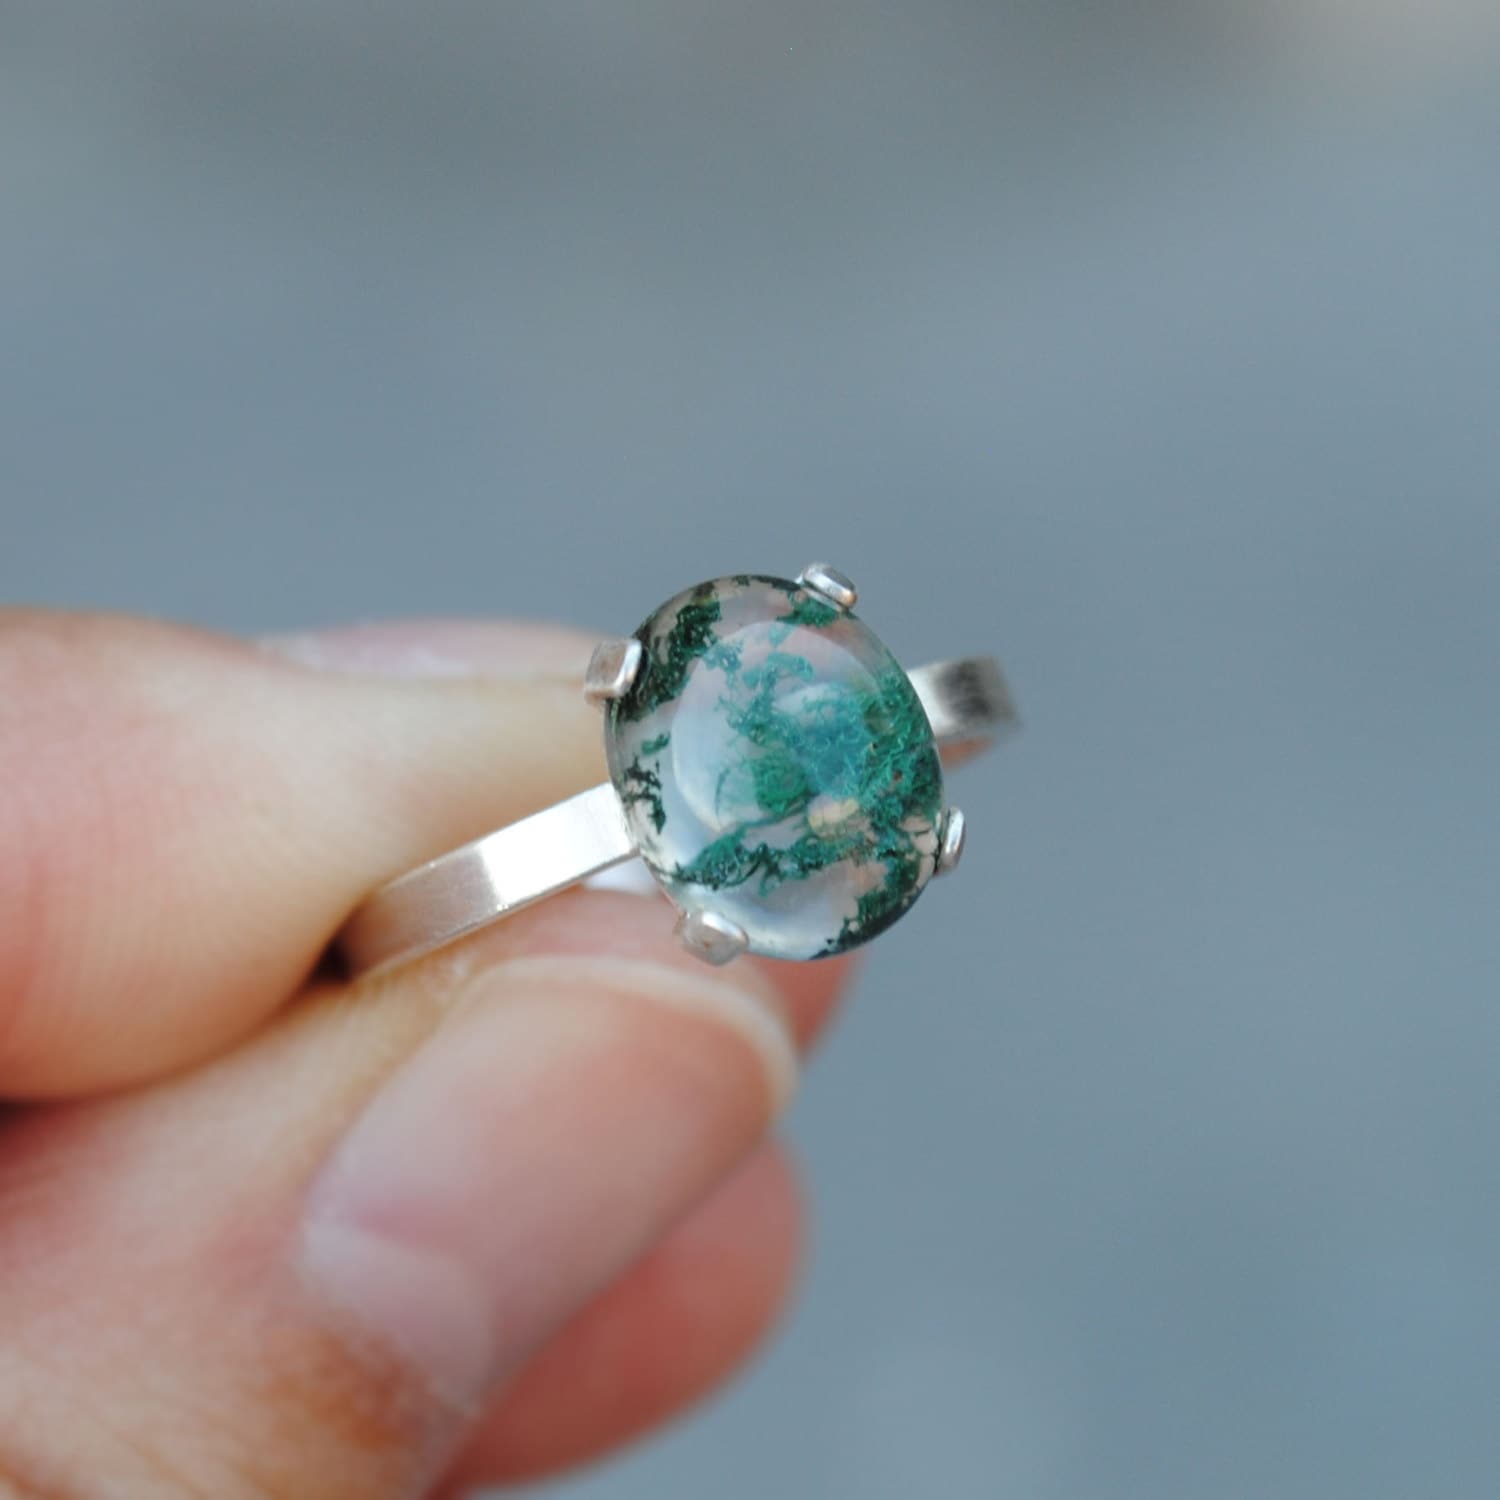 Moss Agate Ring Moss Agate Jewelry Sterling Silver Agate